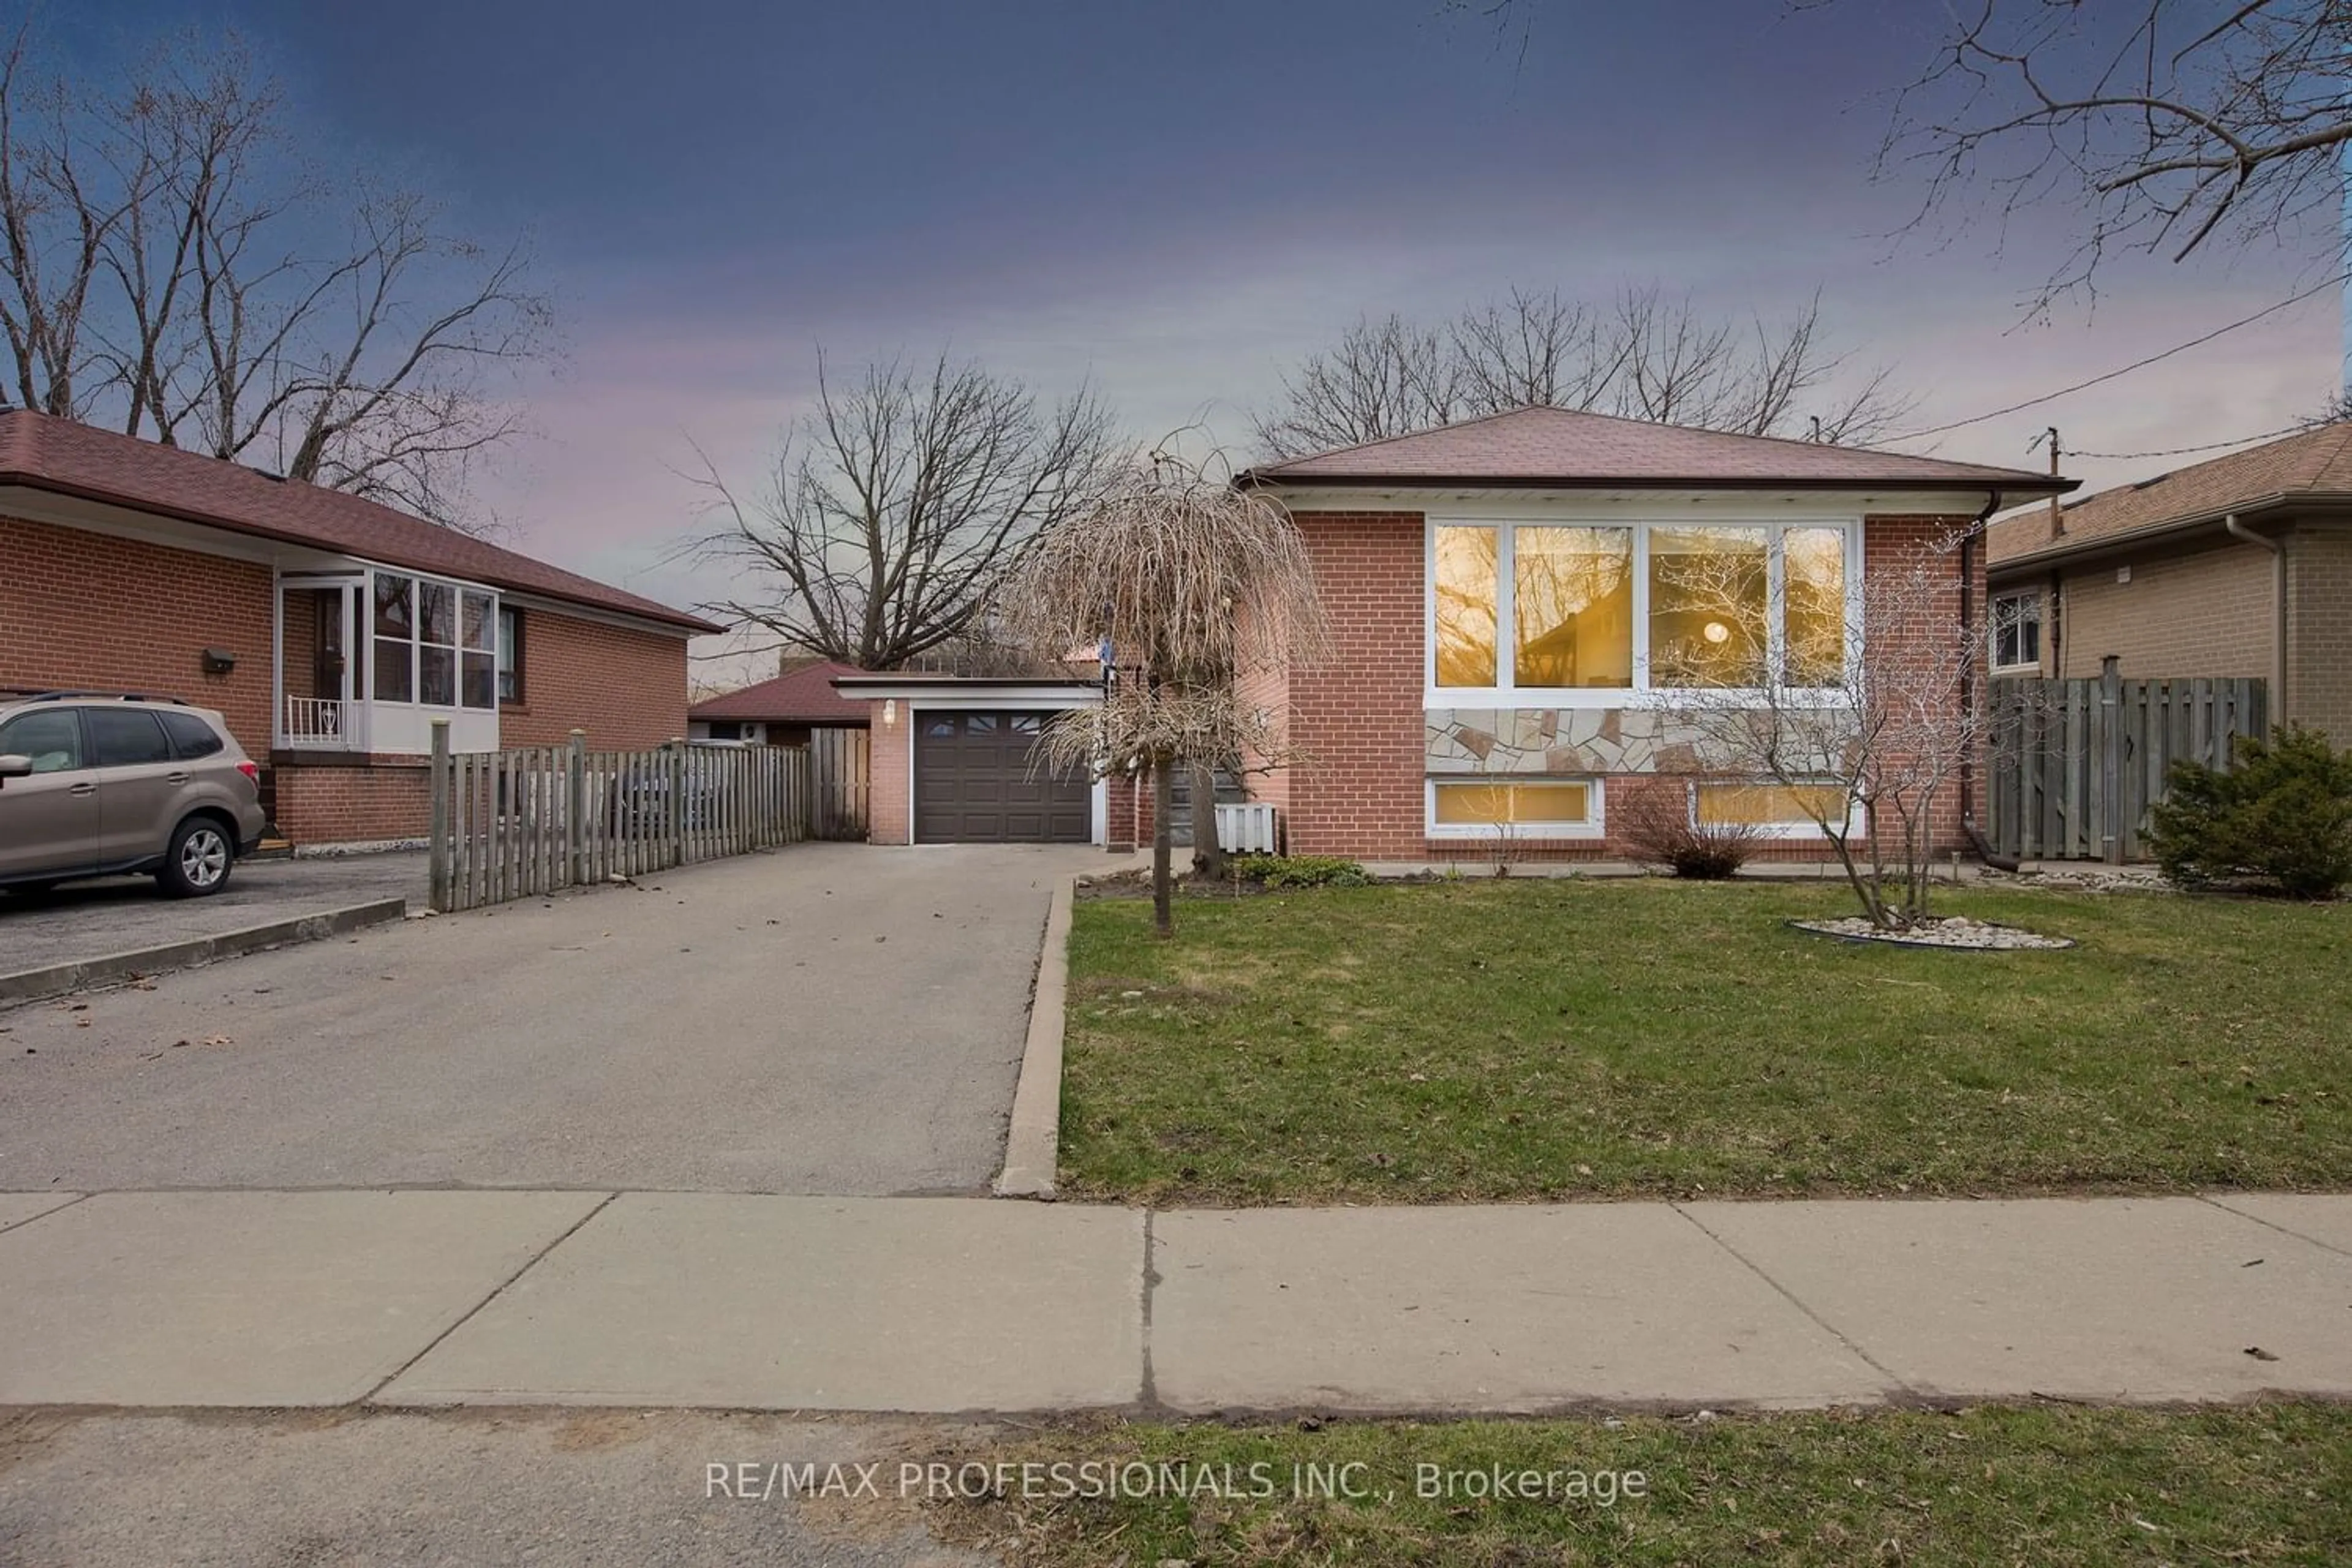 Frontside or backside of a home for 164 Wellesworth Dr, Toronto Ontario M9C 4S1